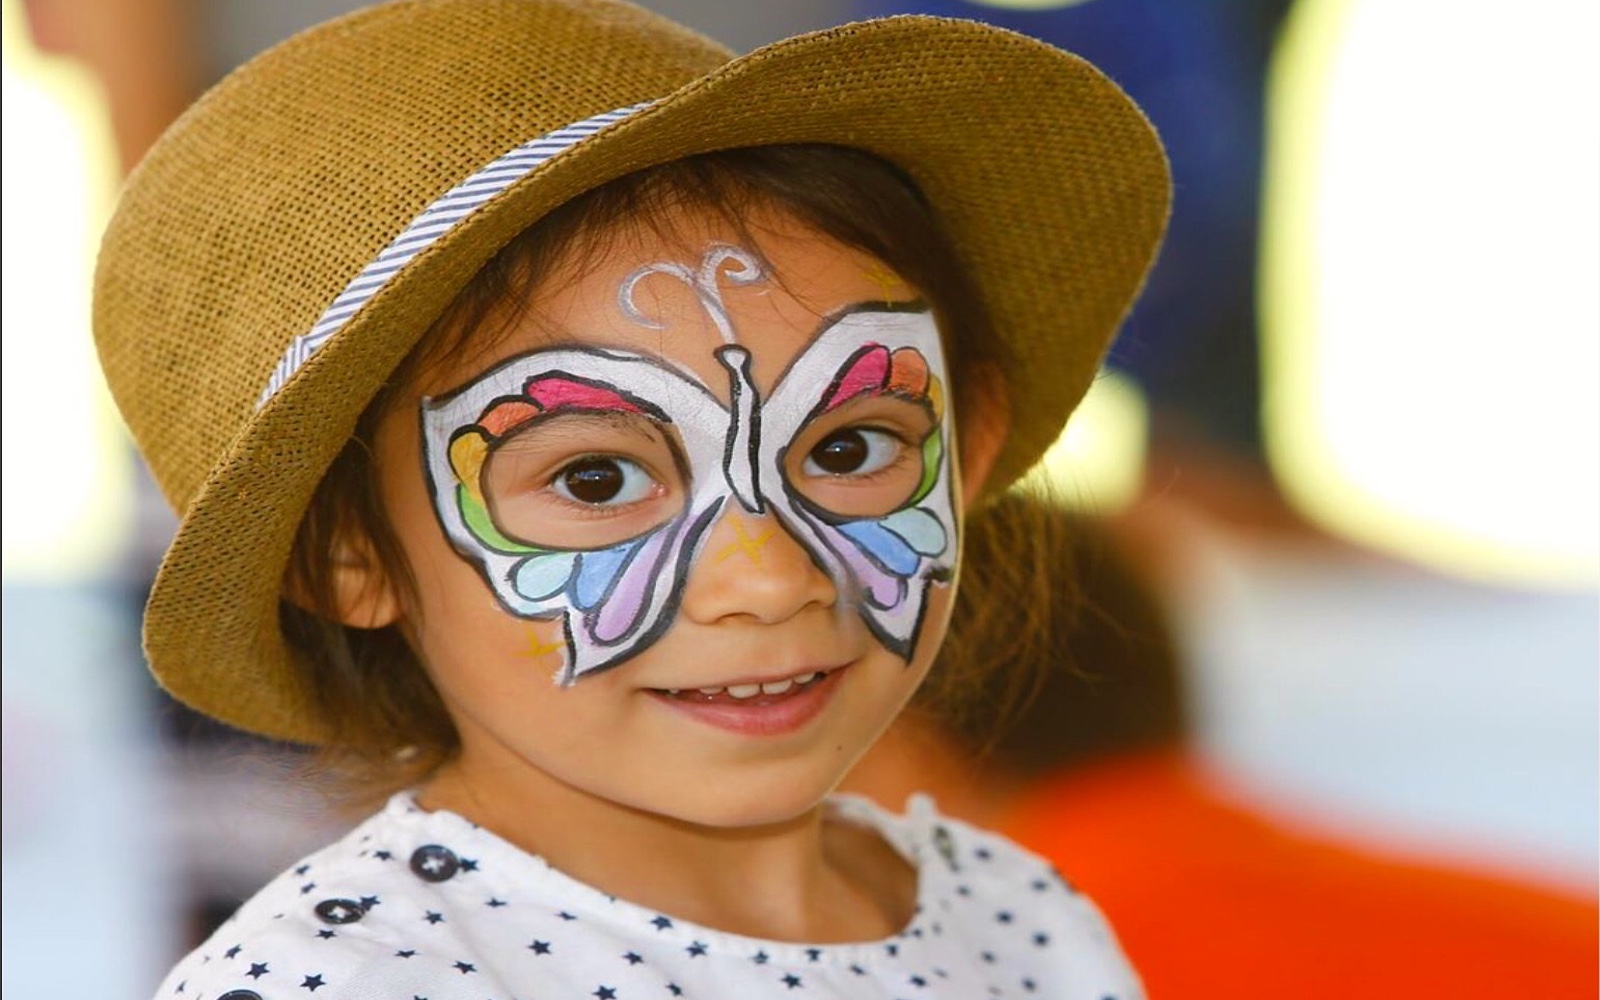 A girl has her face painted at the Vancouver International Children’s Festival